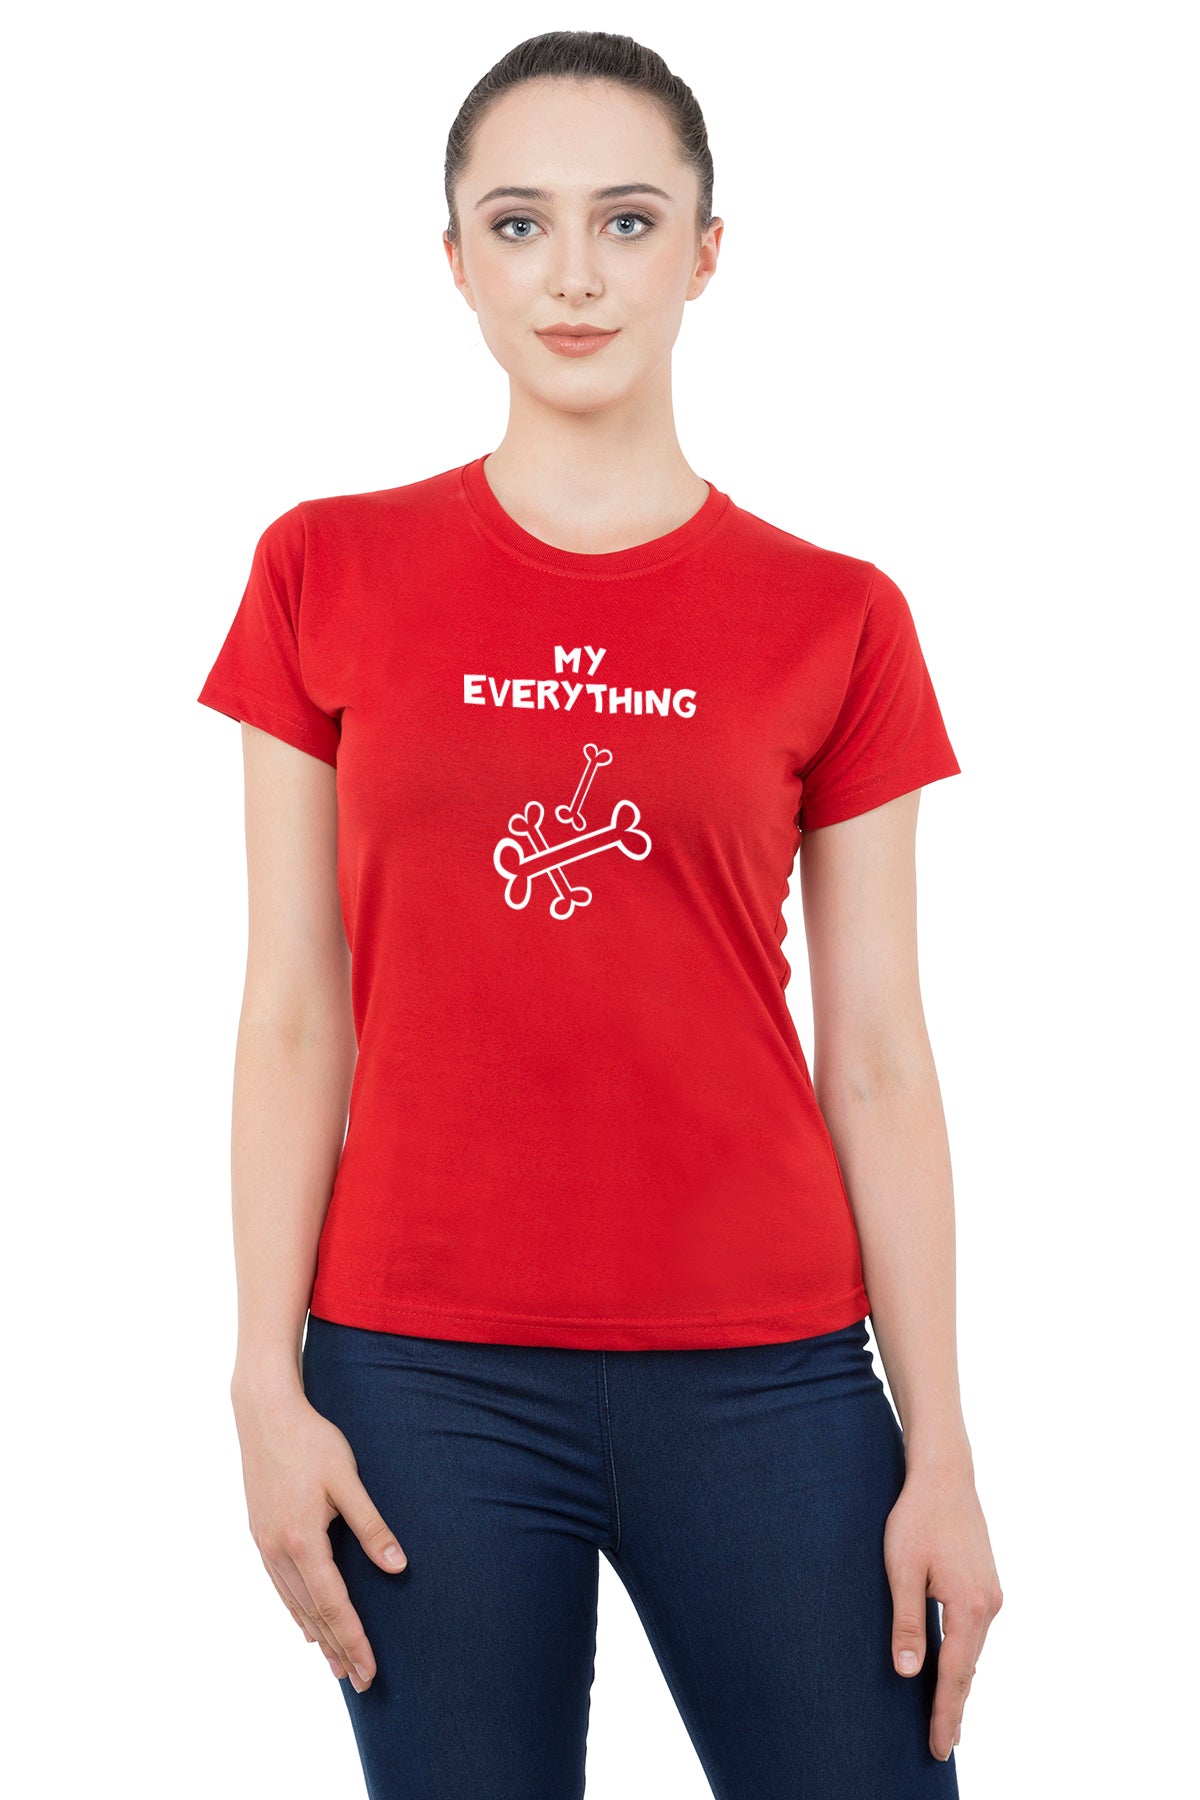 My Everything matching Couple T shirts- Red